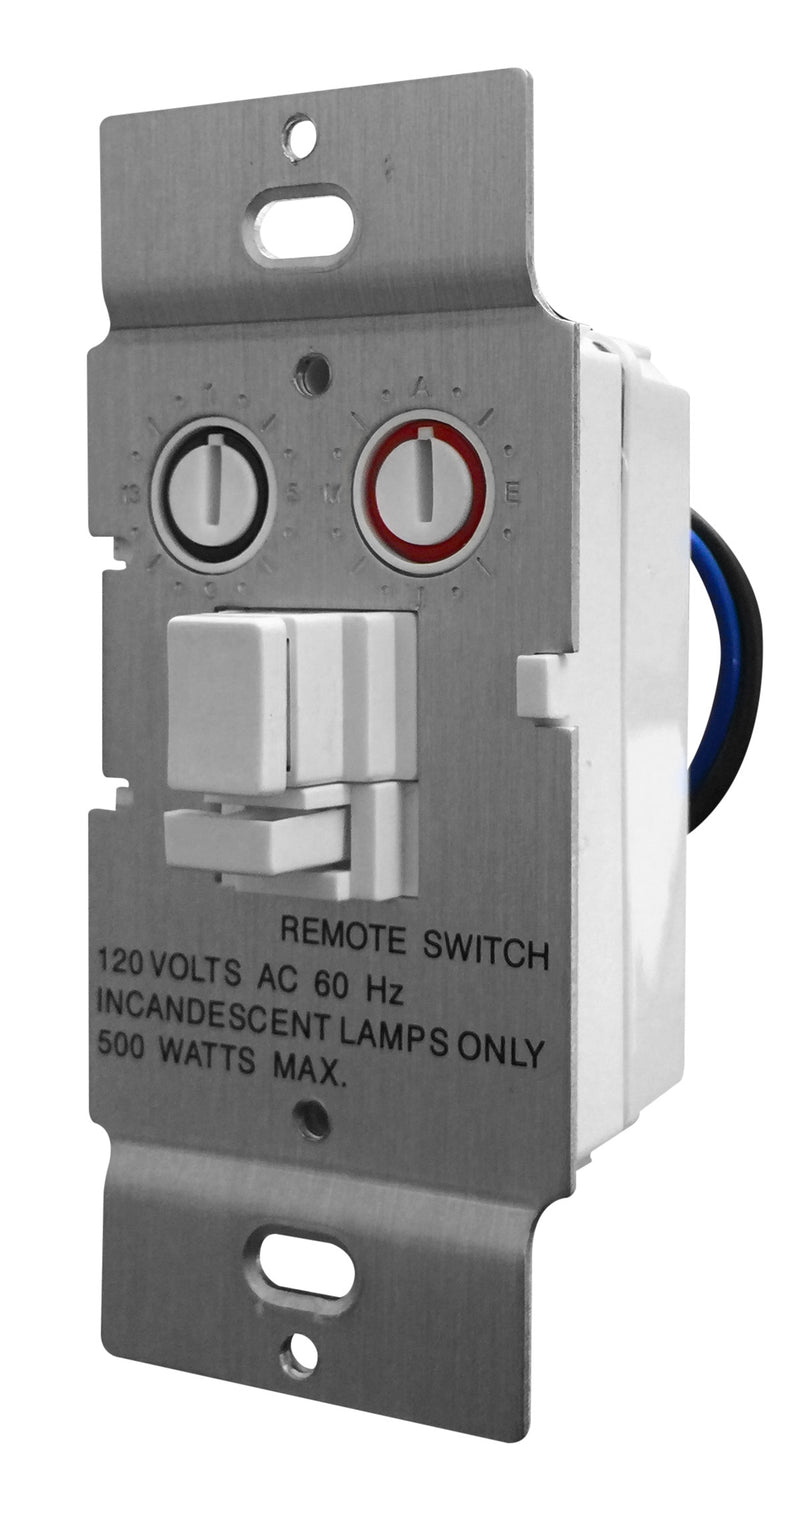 WS18A X10 Push Button Dimmable Wall Switch - Works with LED bulbs –